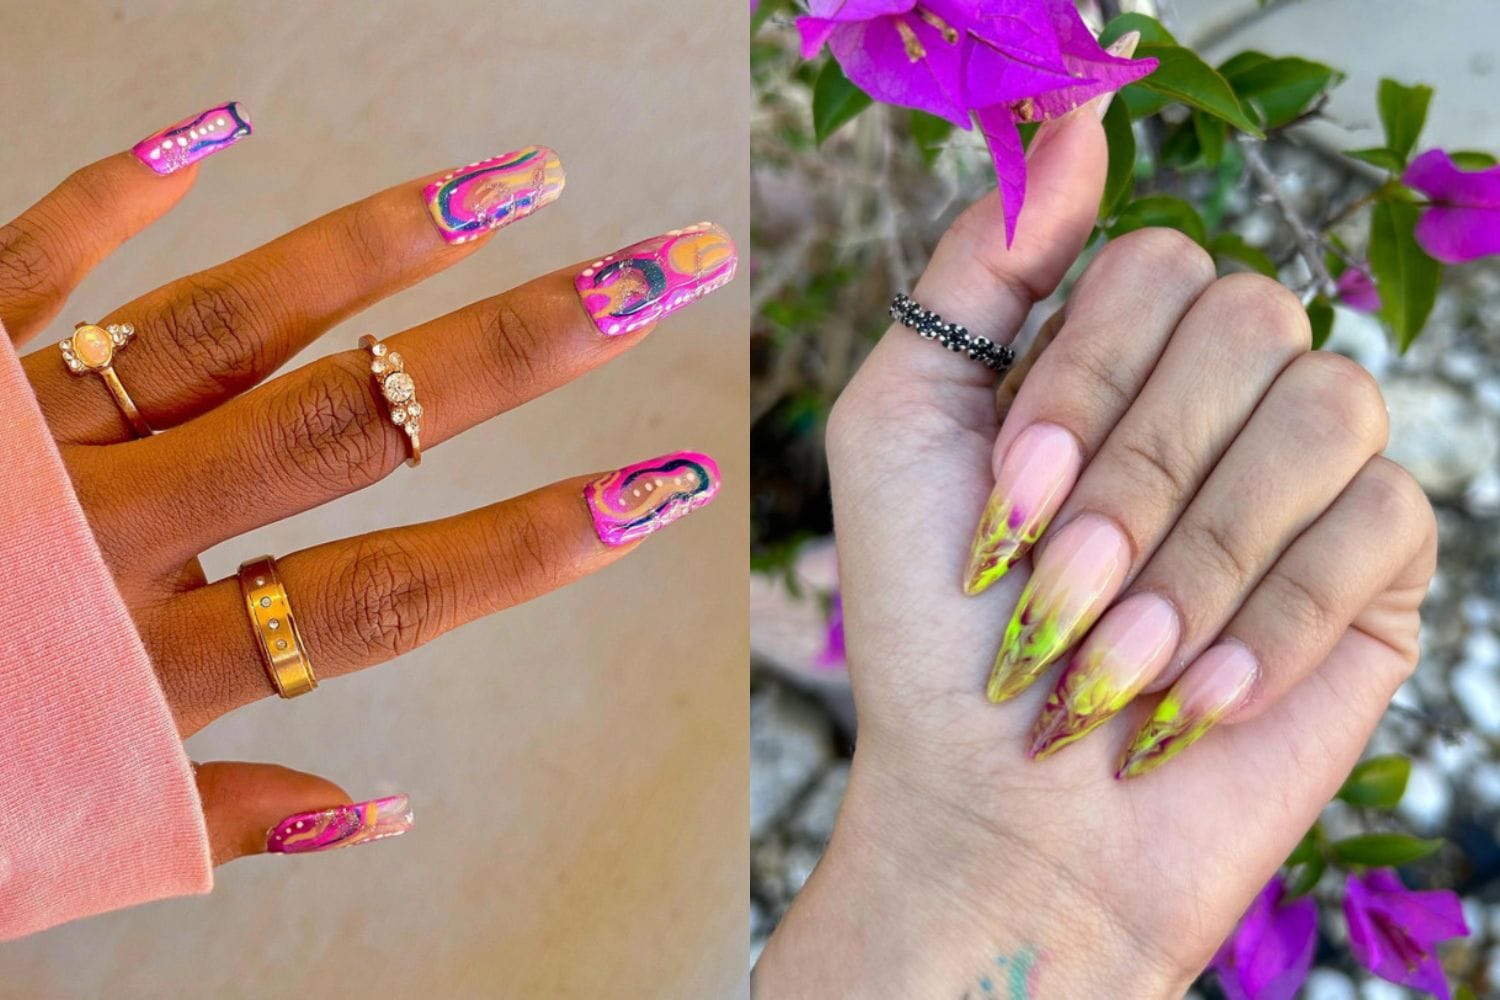 10 '70s-Inspired Nail Art Ideas for Your Manicure | Who What Wear